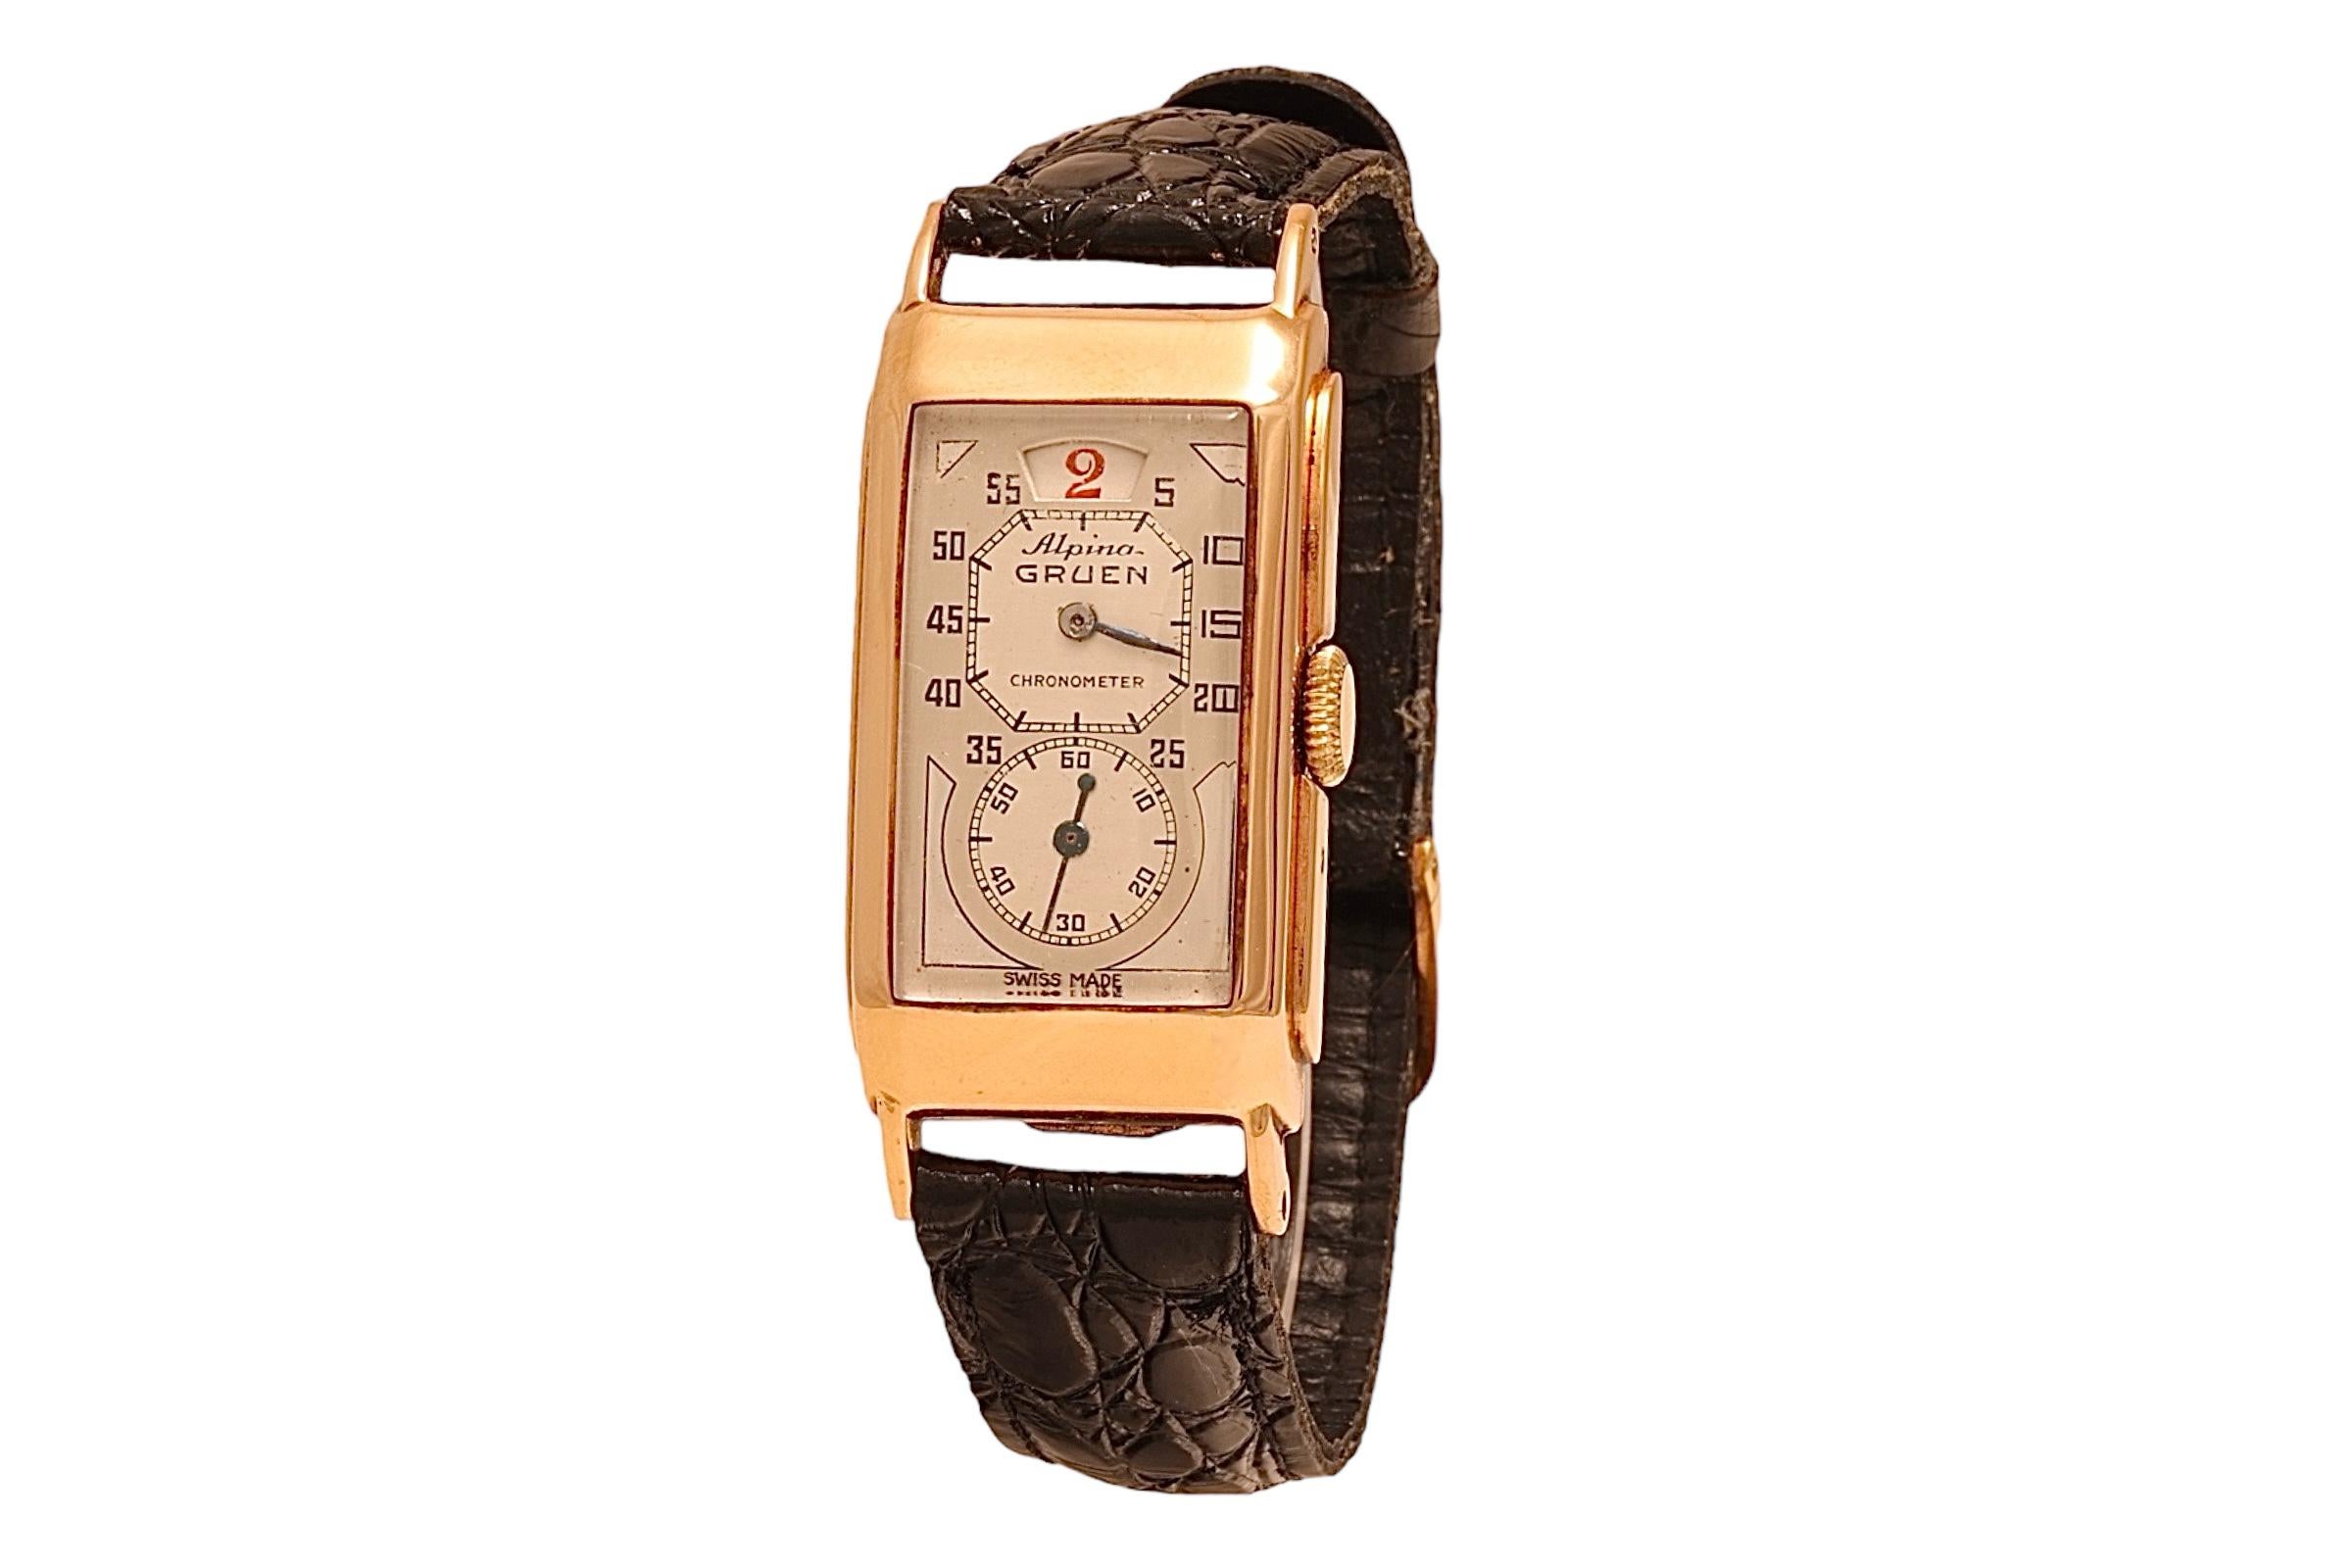 14 Kt Gold Alpina Gruen / Rolex Prince Doctors Jump Hour Wrist Watch

Extremely Rare Collectors  !

Movement : Cal. 877S rectangular-shaped mechanical movement, 17 jewels, Manual Winding Jump Hour.

Case : 14 Kt Gold, 21.7 mm Wide and Length 37 mm